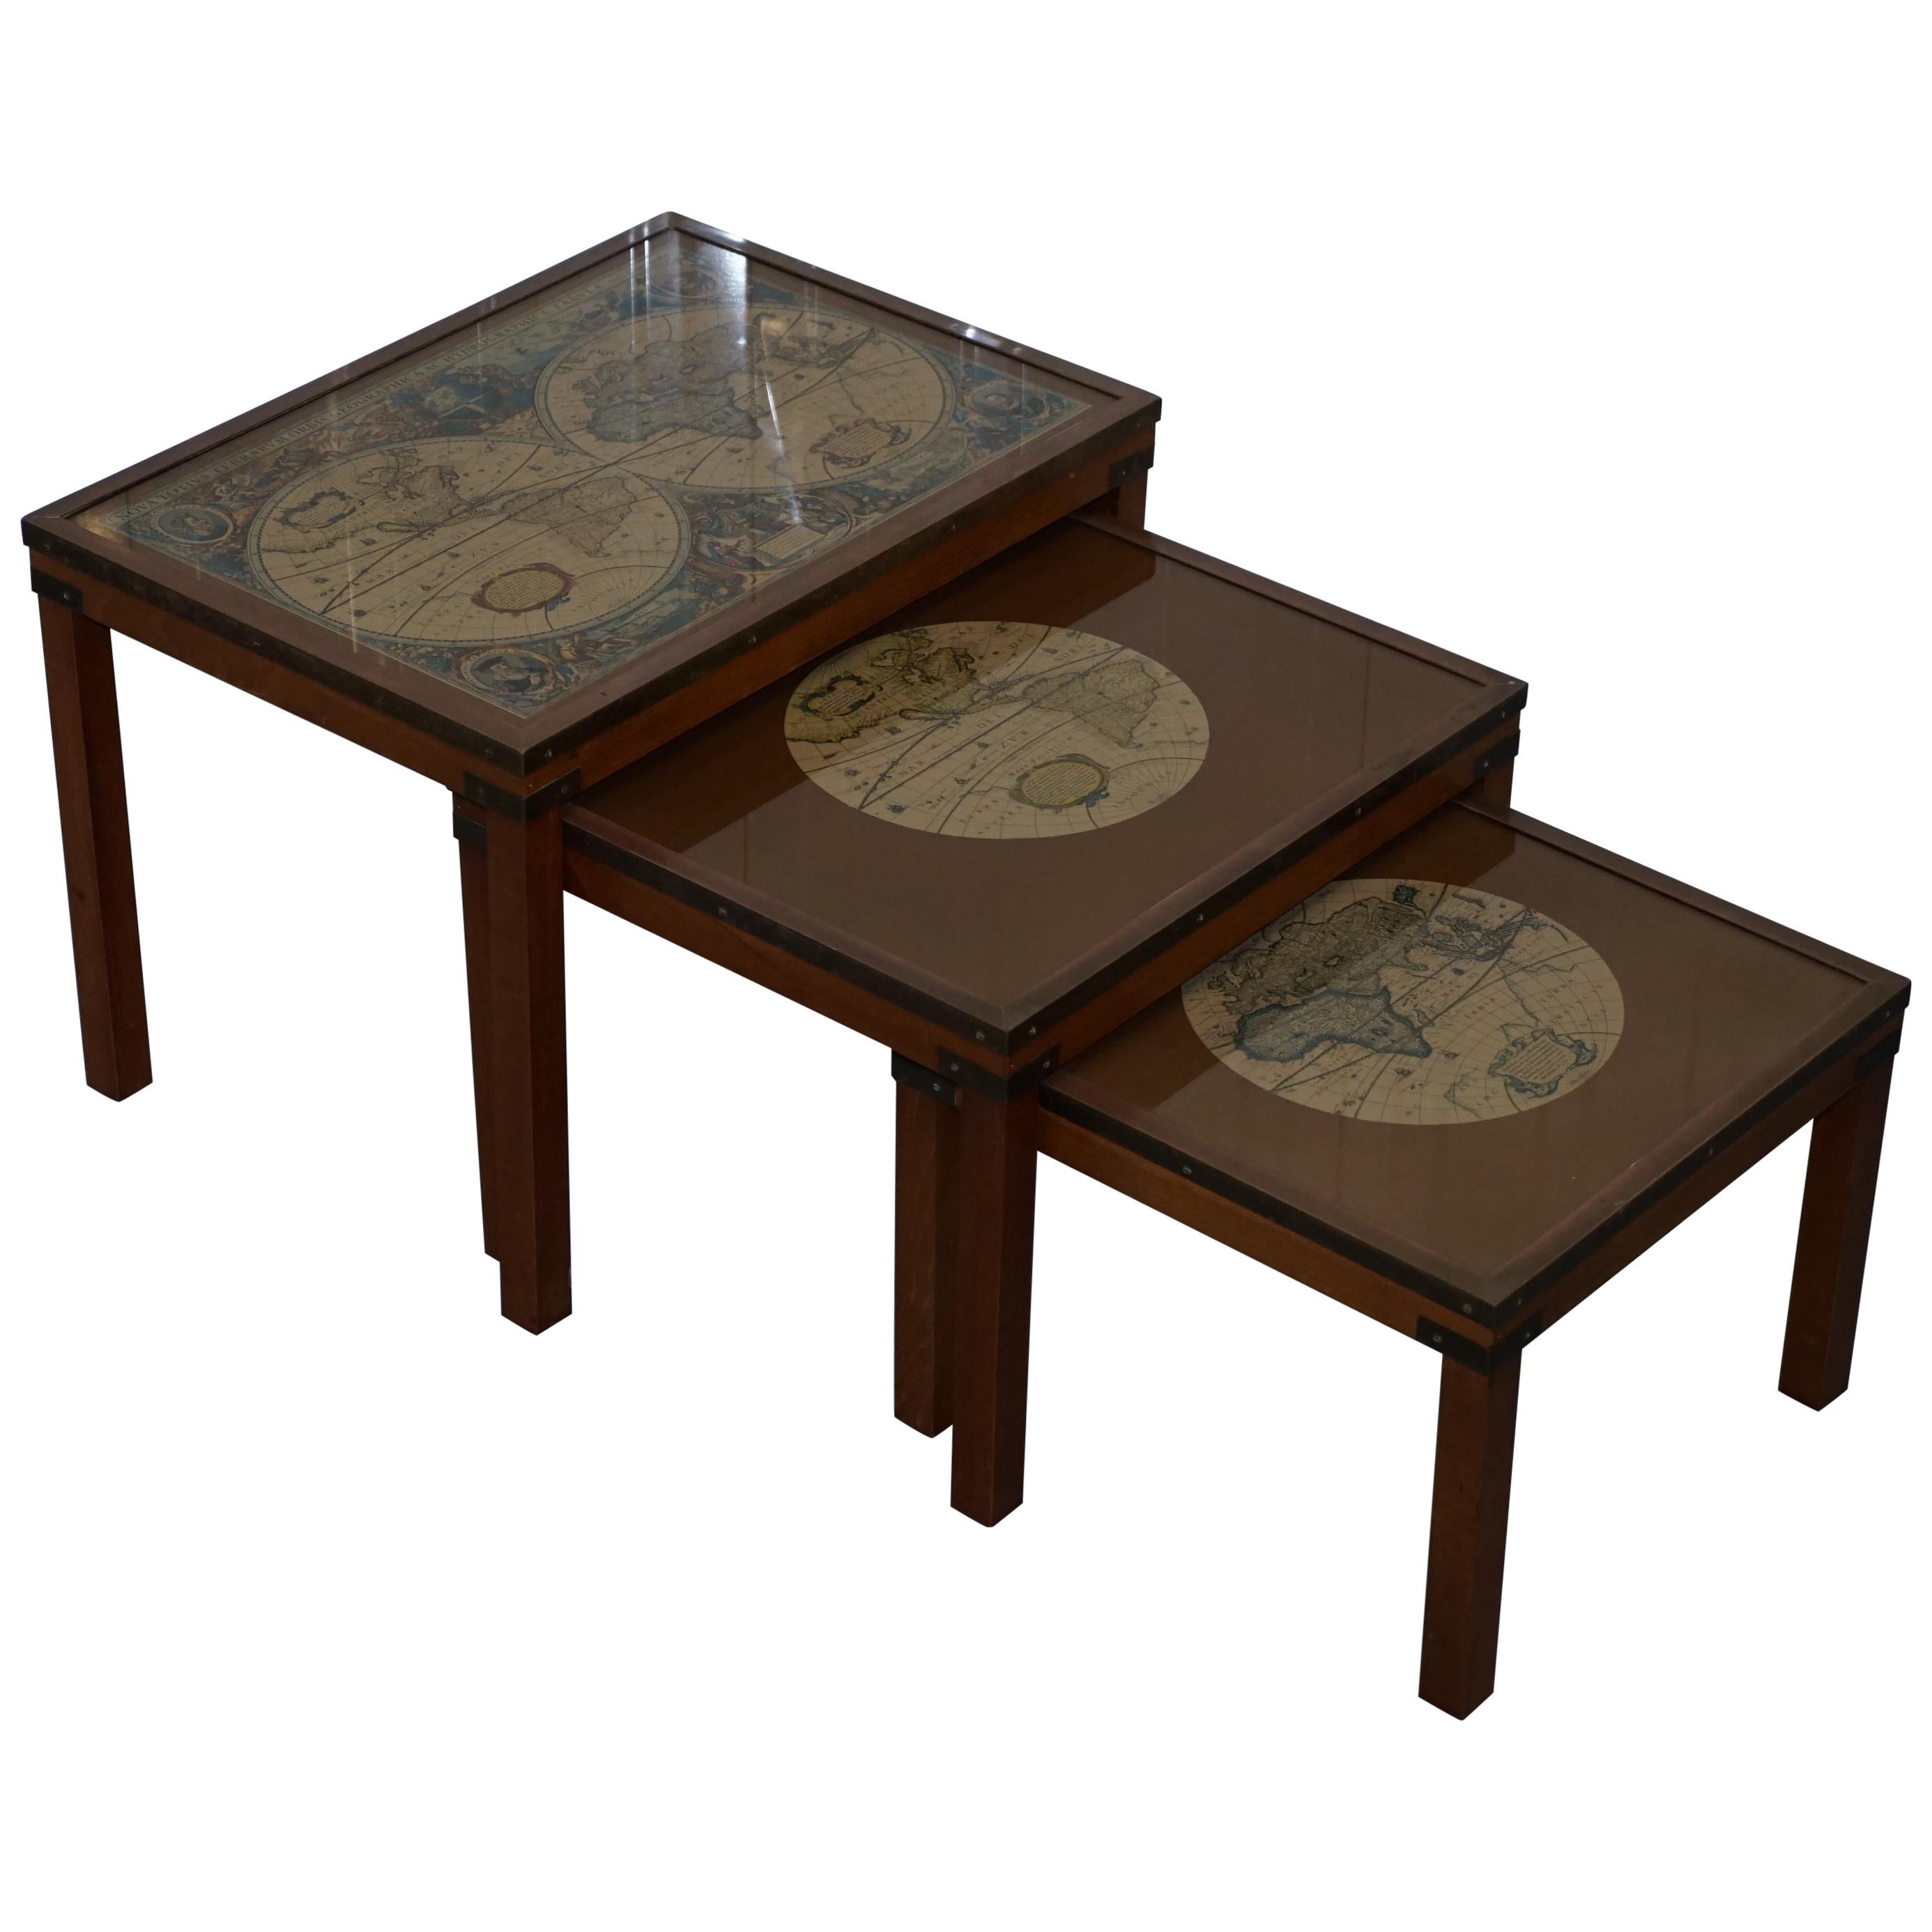 Nest of Three Vintage Campaign Tables with Global Maps Design Brass Corners